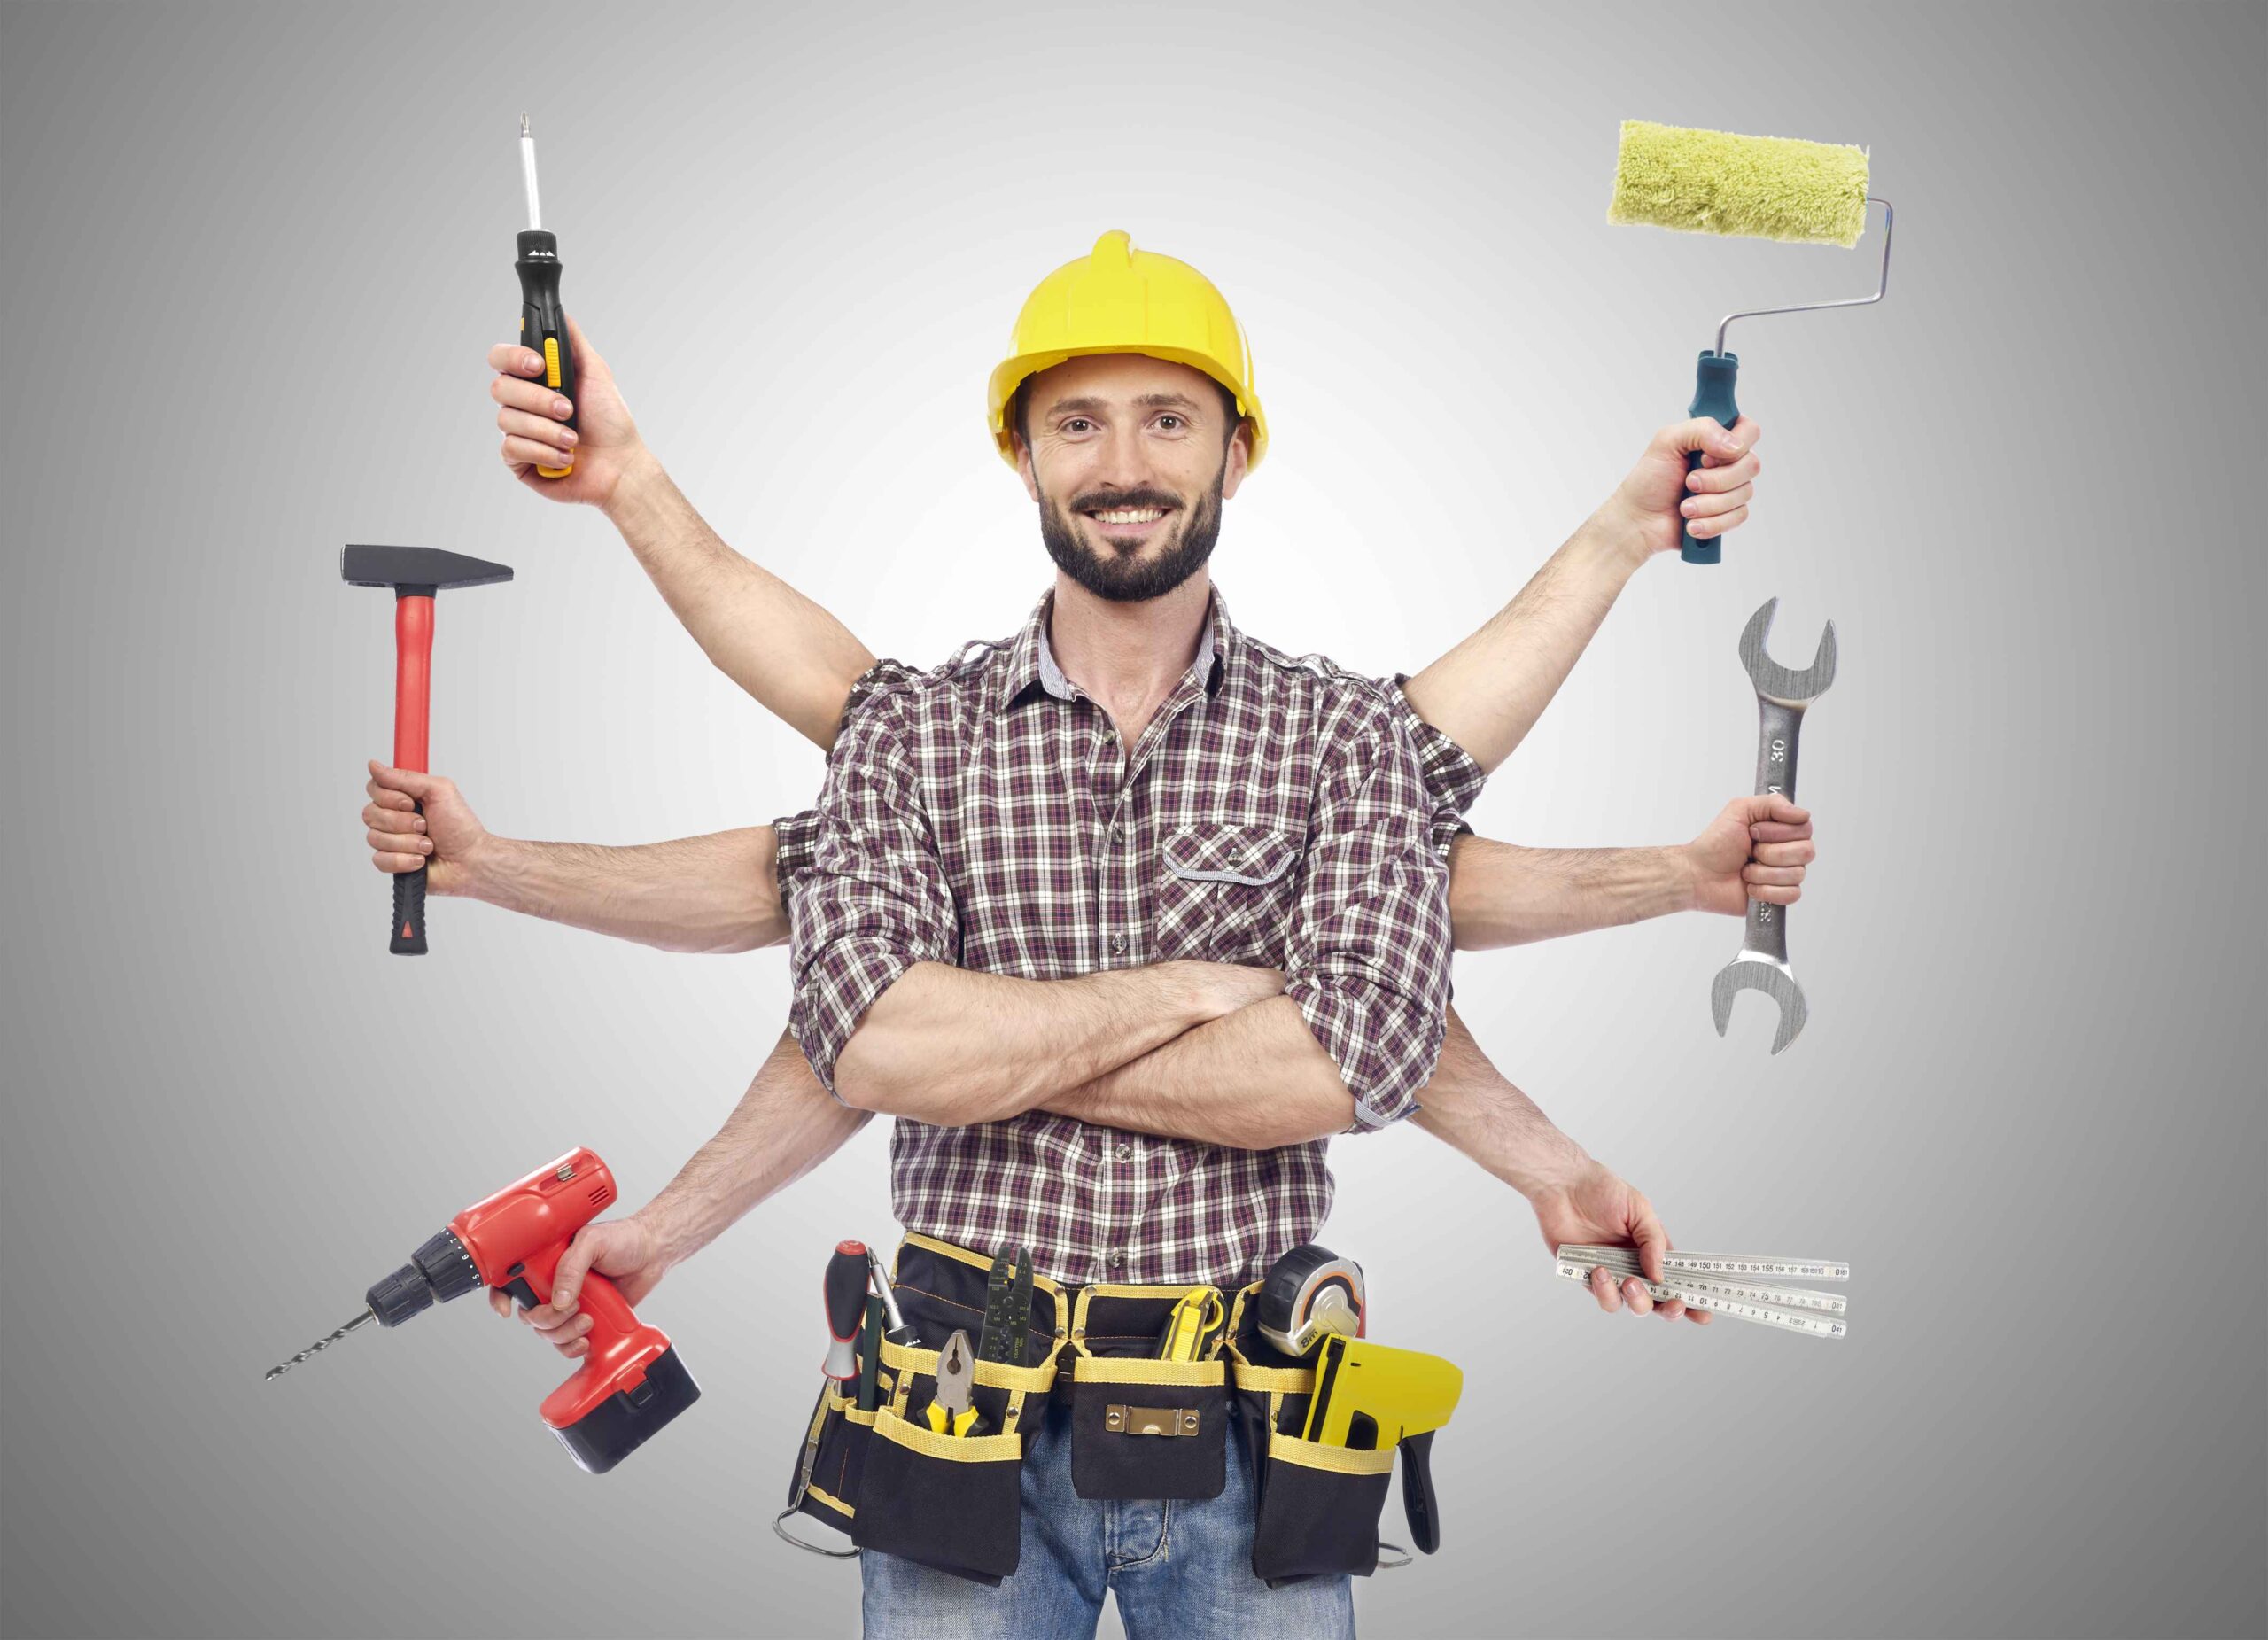 Finding the Right Handyman: What to Look for When Hiring